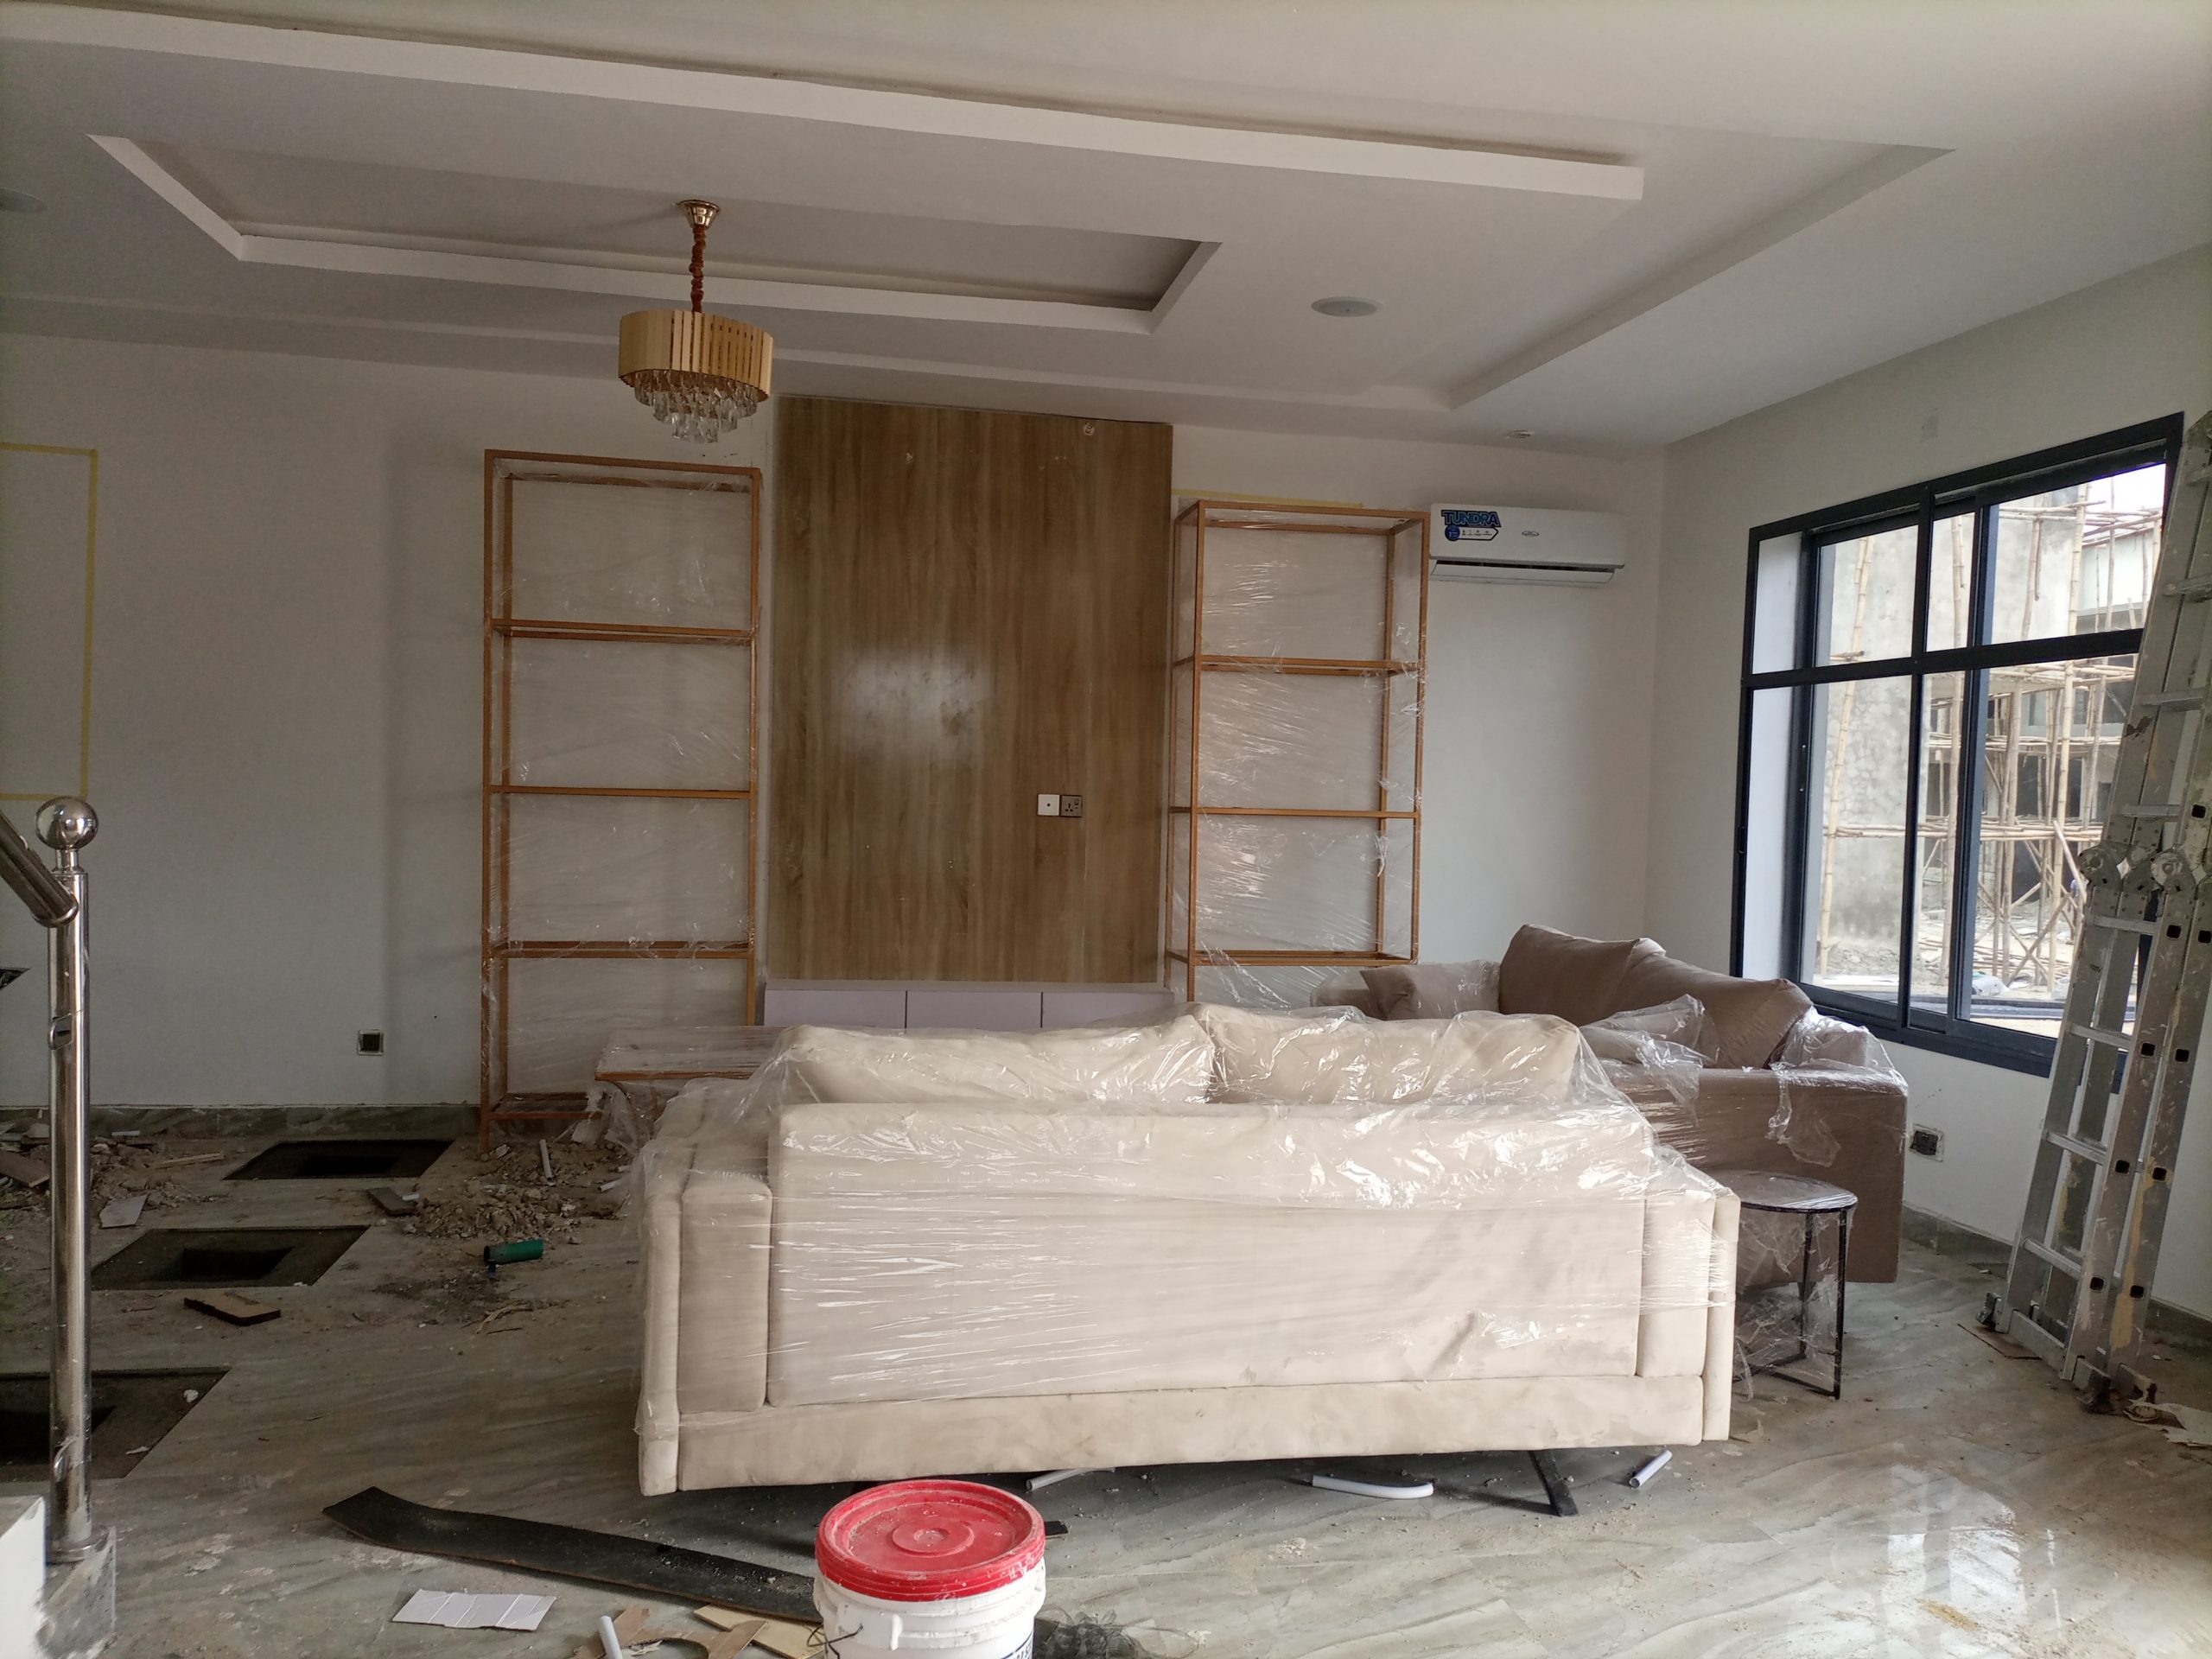 Interior Living Area of 2 Bedroom Duplex For Sale in Ajah with installment payment at Ambiance Estate